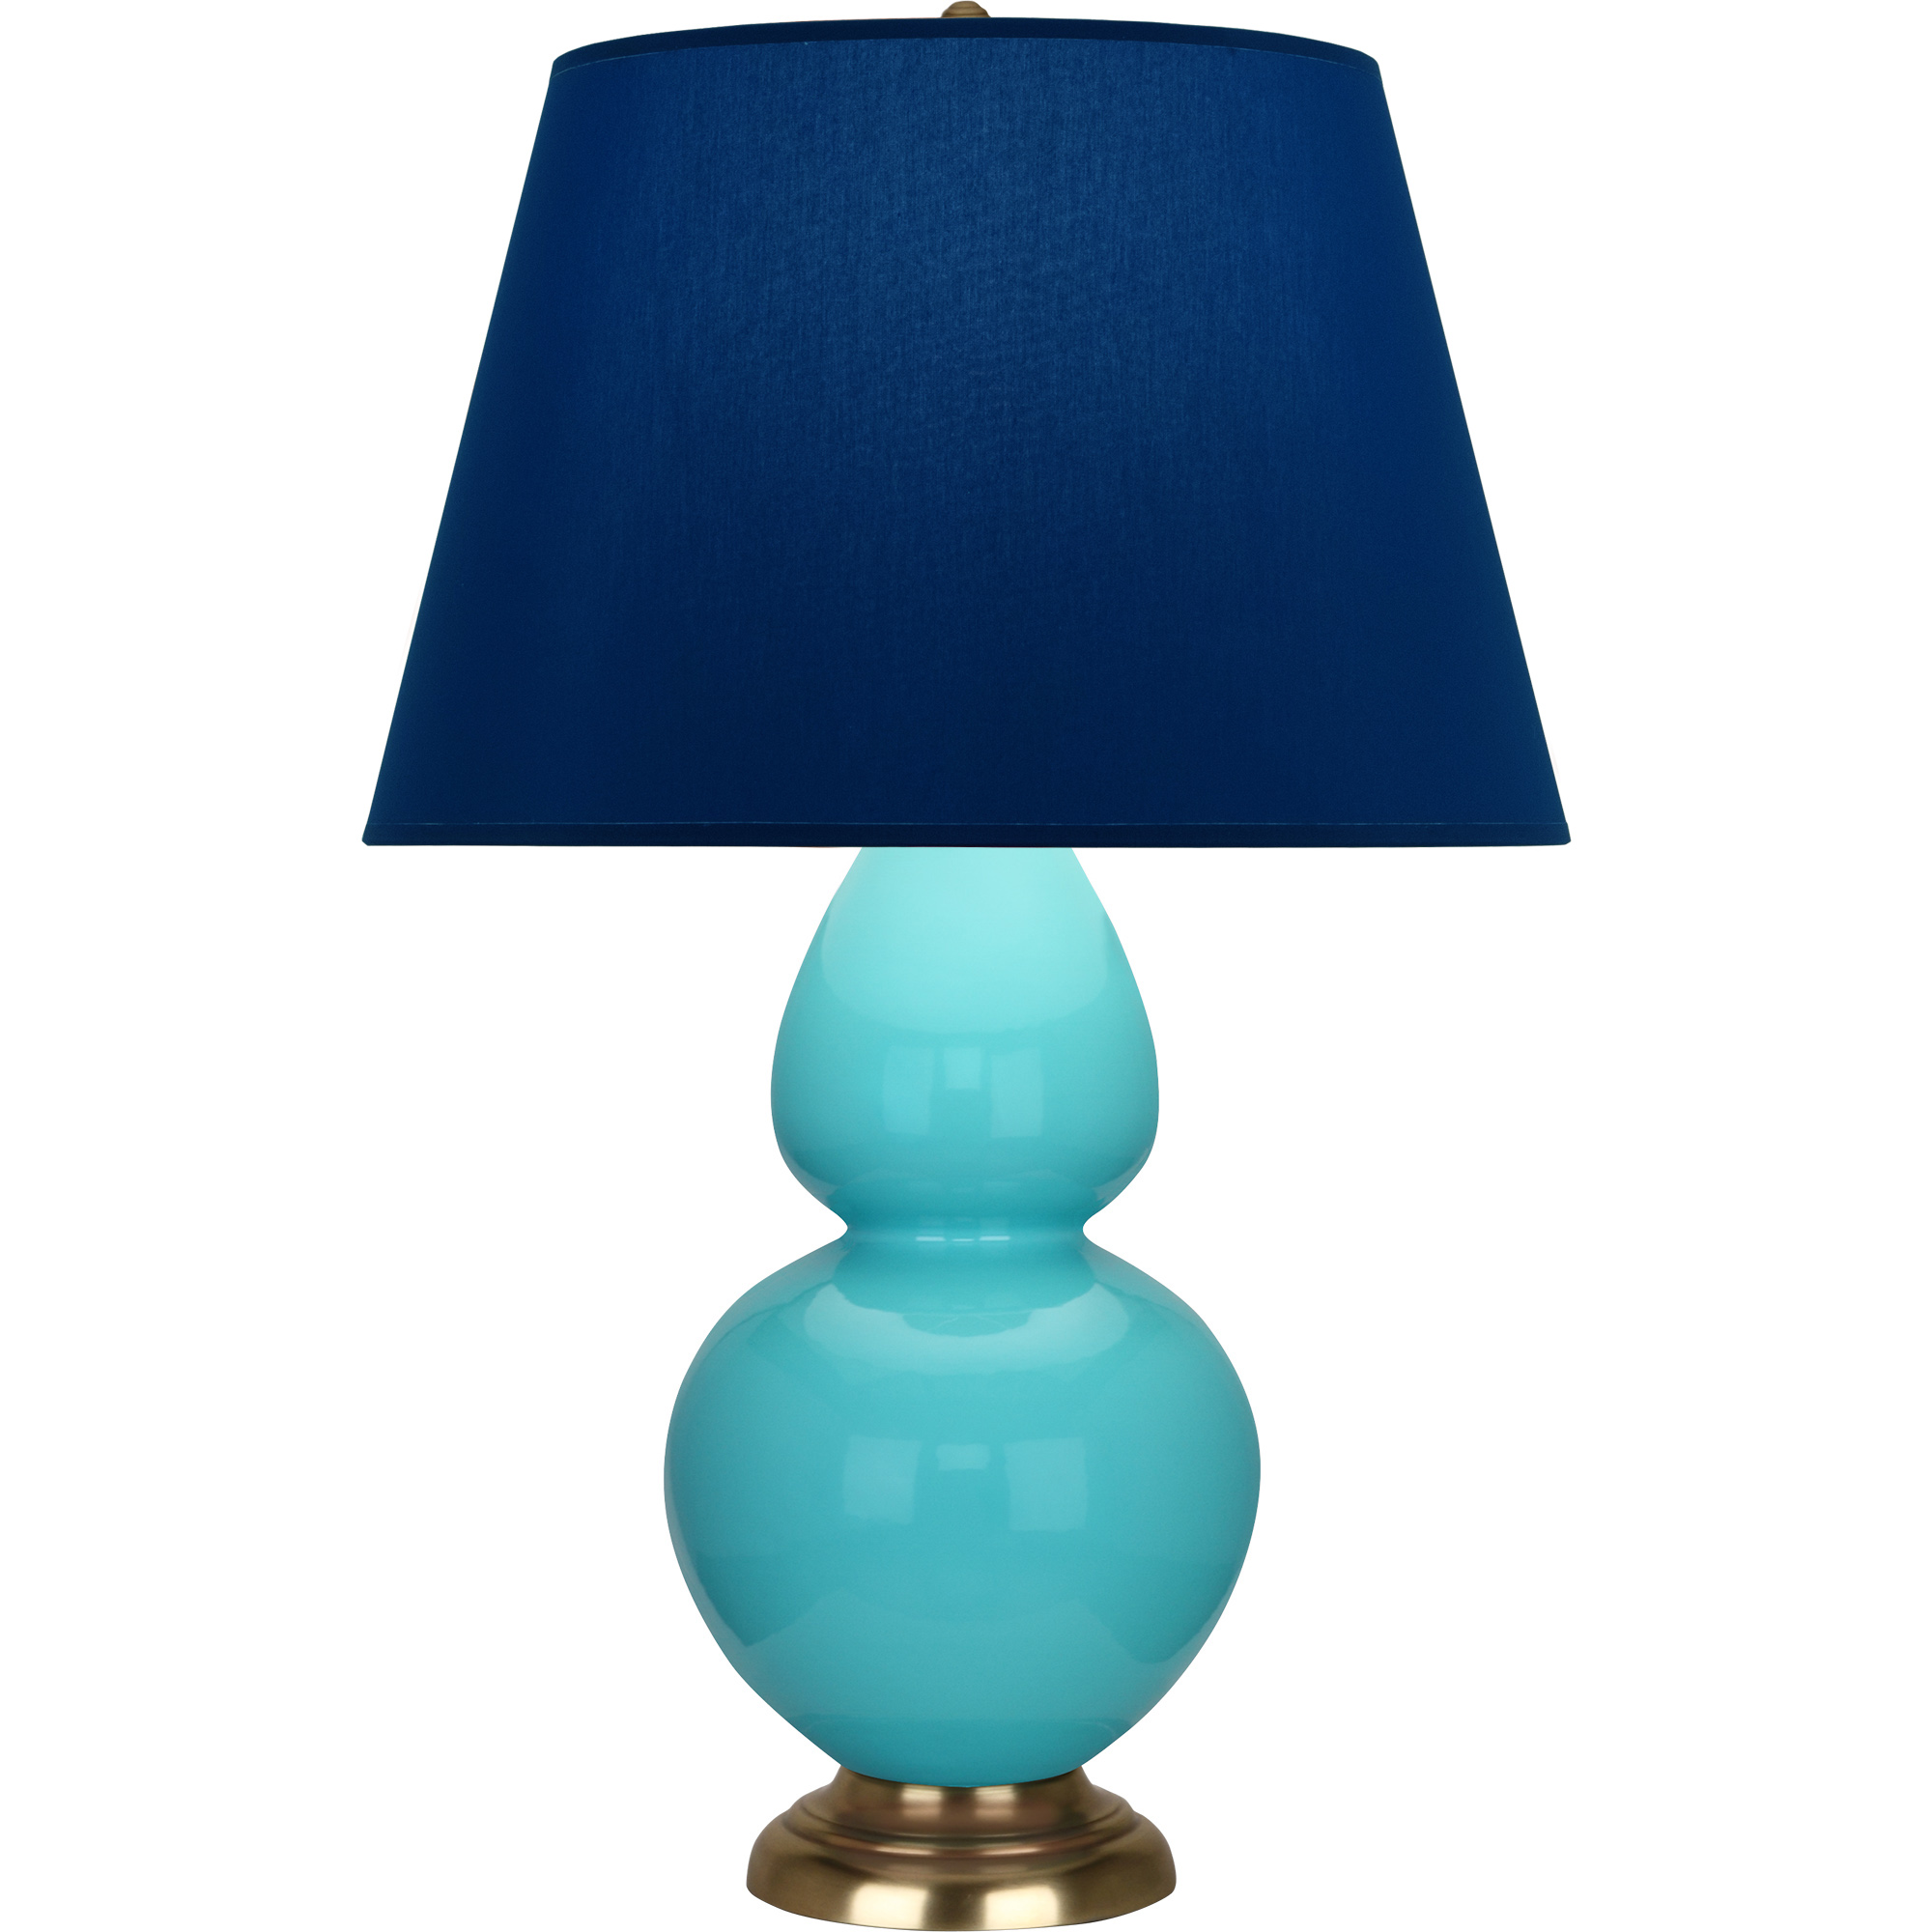 Double Gourd Table Lamp Style #1740N